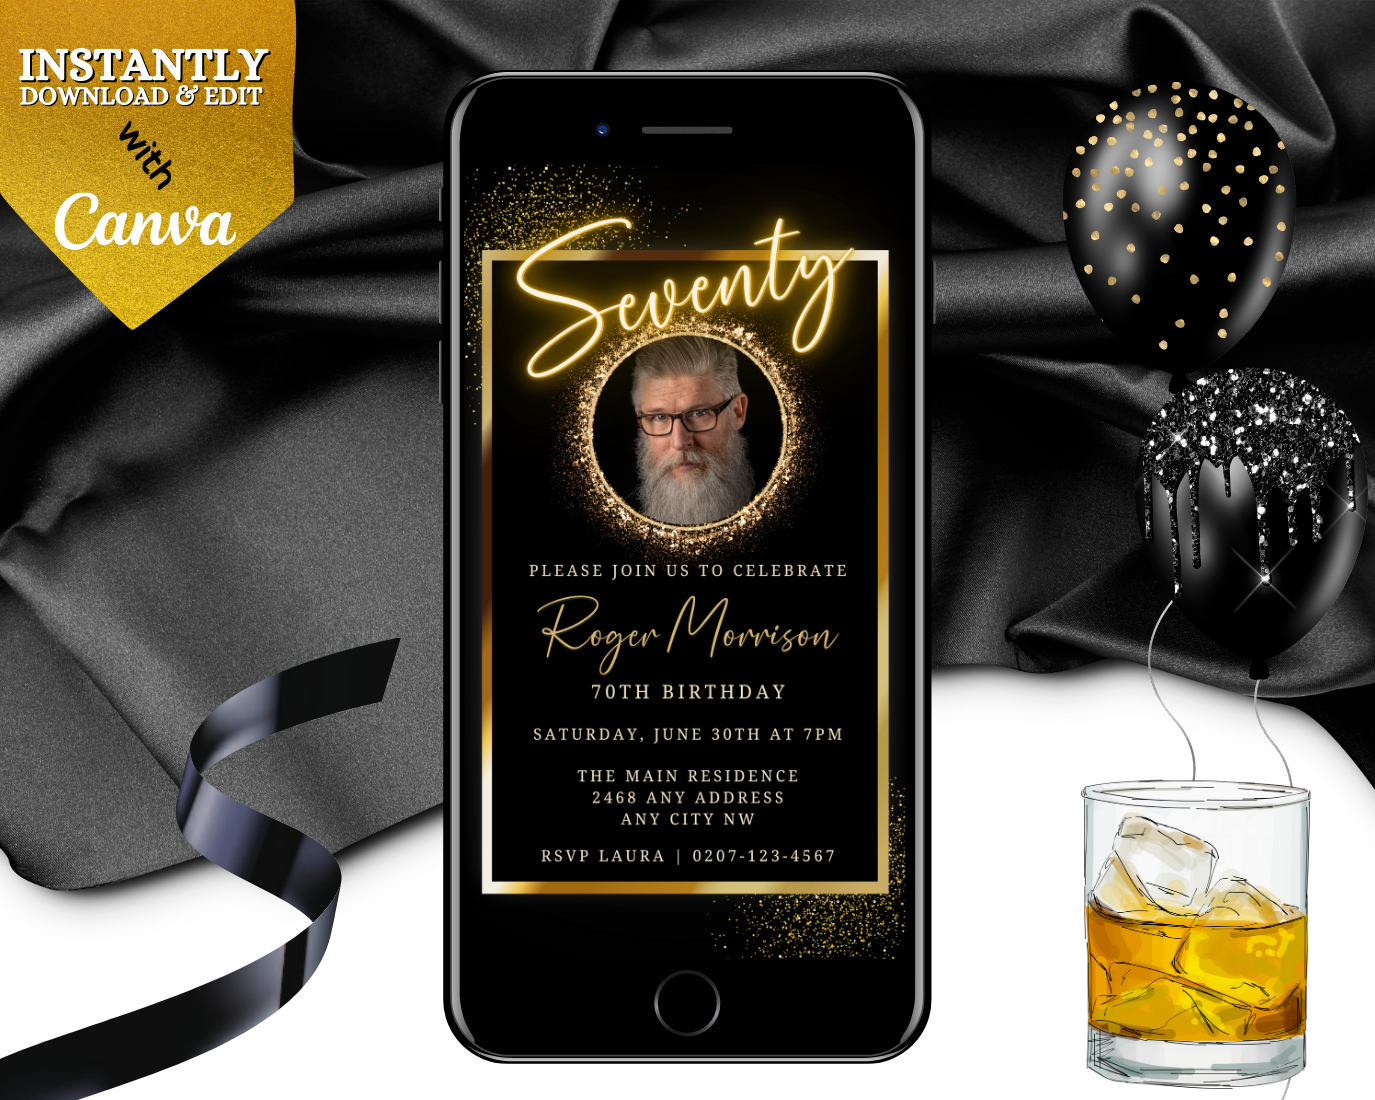 Neon Gold Oval Photo Frame | 70th Birthday Evite on a smartphone screen displaying a bearded man. Includes whiskey glass and black balloon with gold dots in the background.